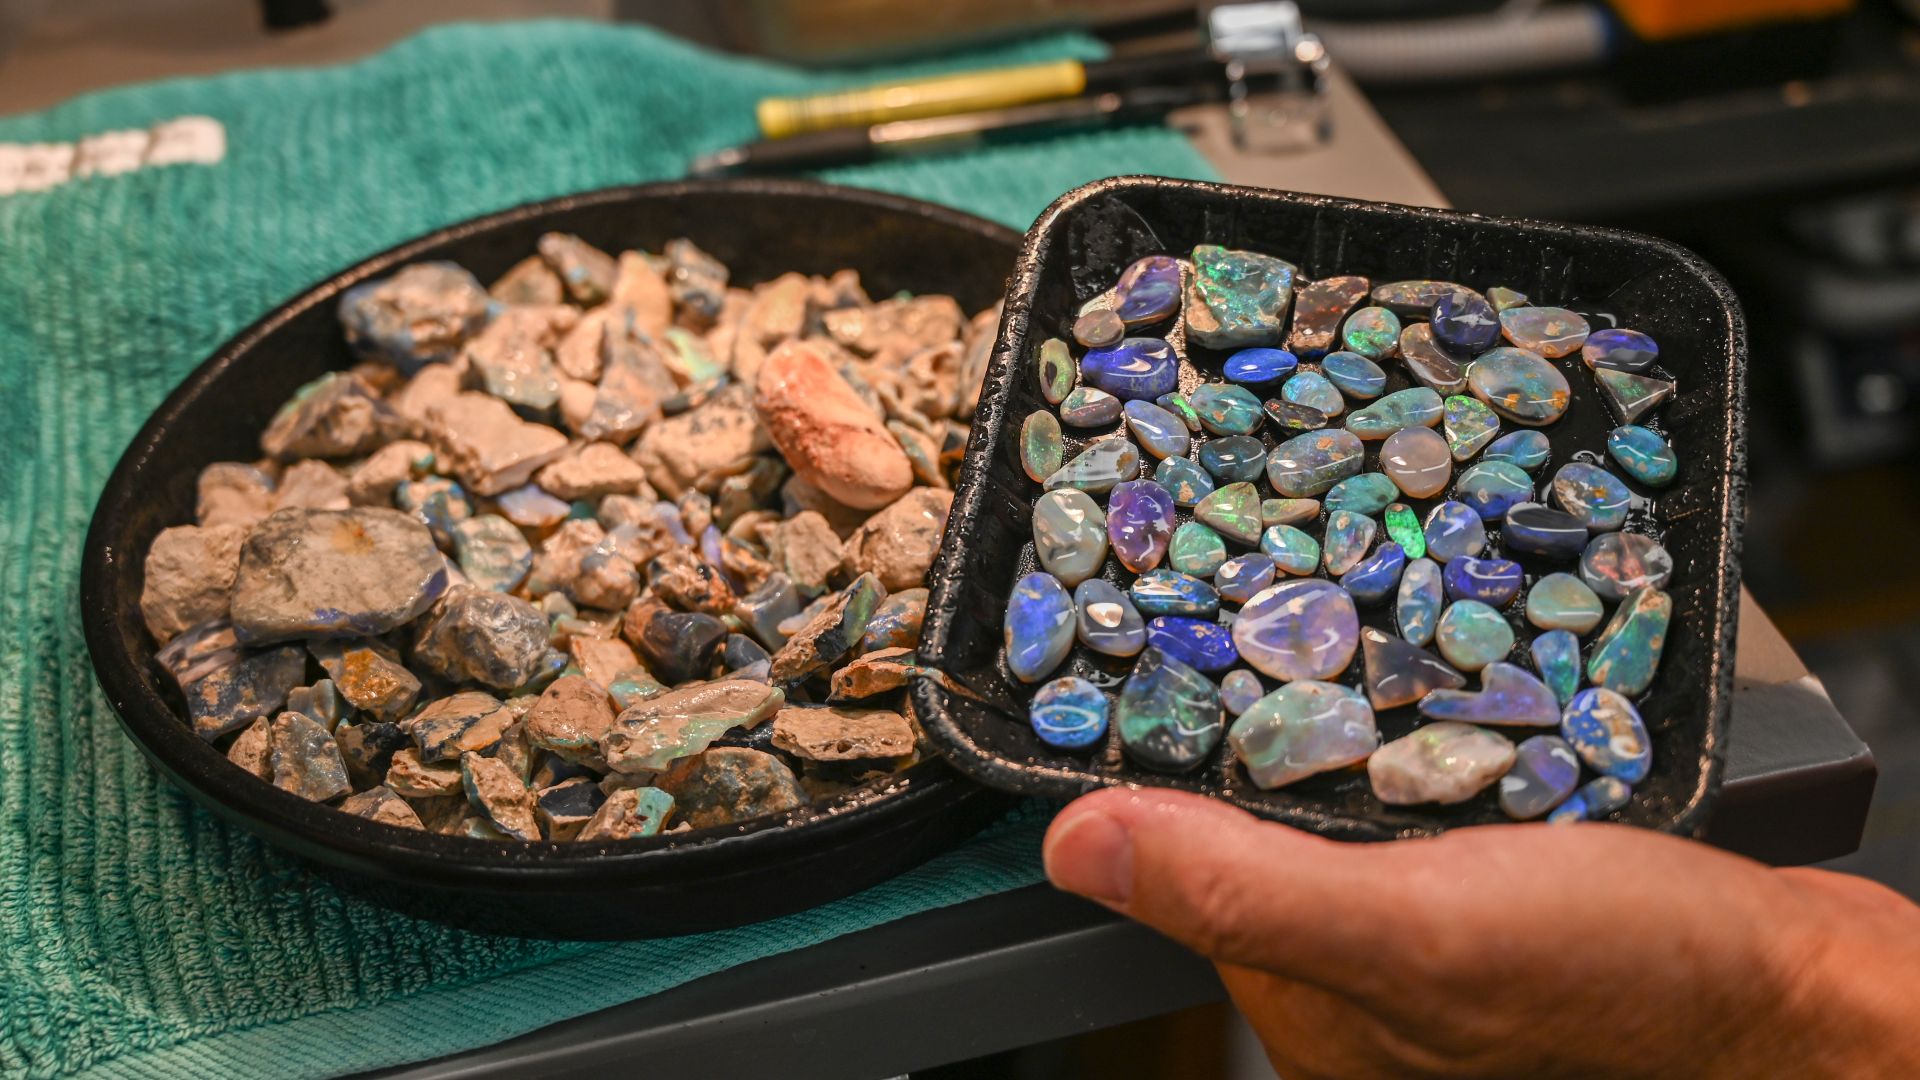 A photo of two plates, one with rubbed back opals, which are blue or green, and the other with rough opals that have been sprayed with water.